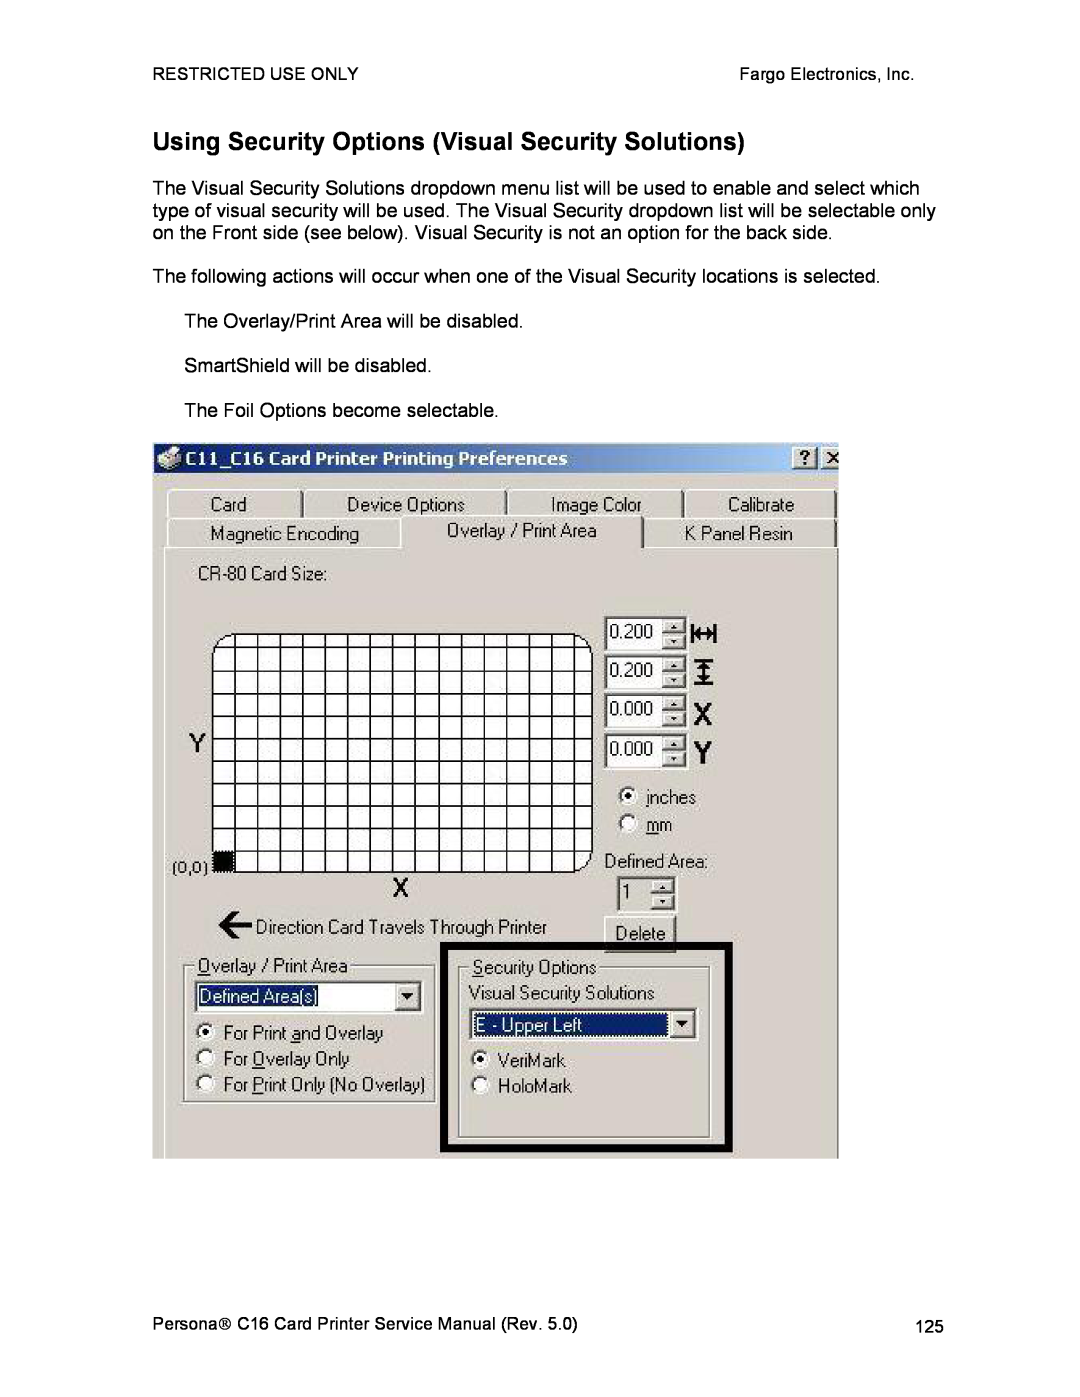 FARGO electronic C16 service manual Using Security Options Visual Security Solutions 